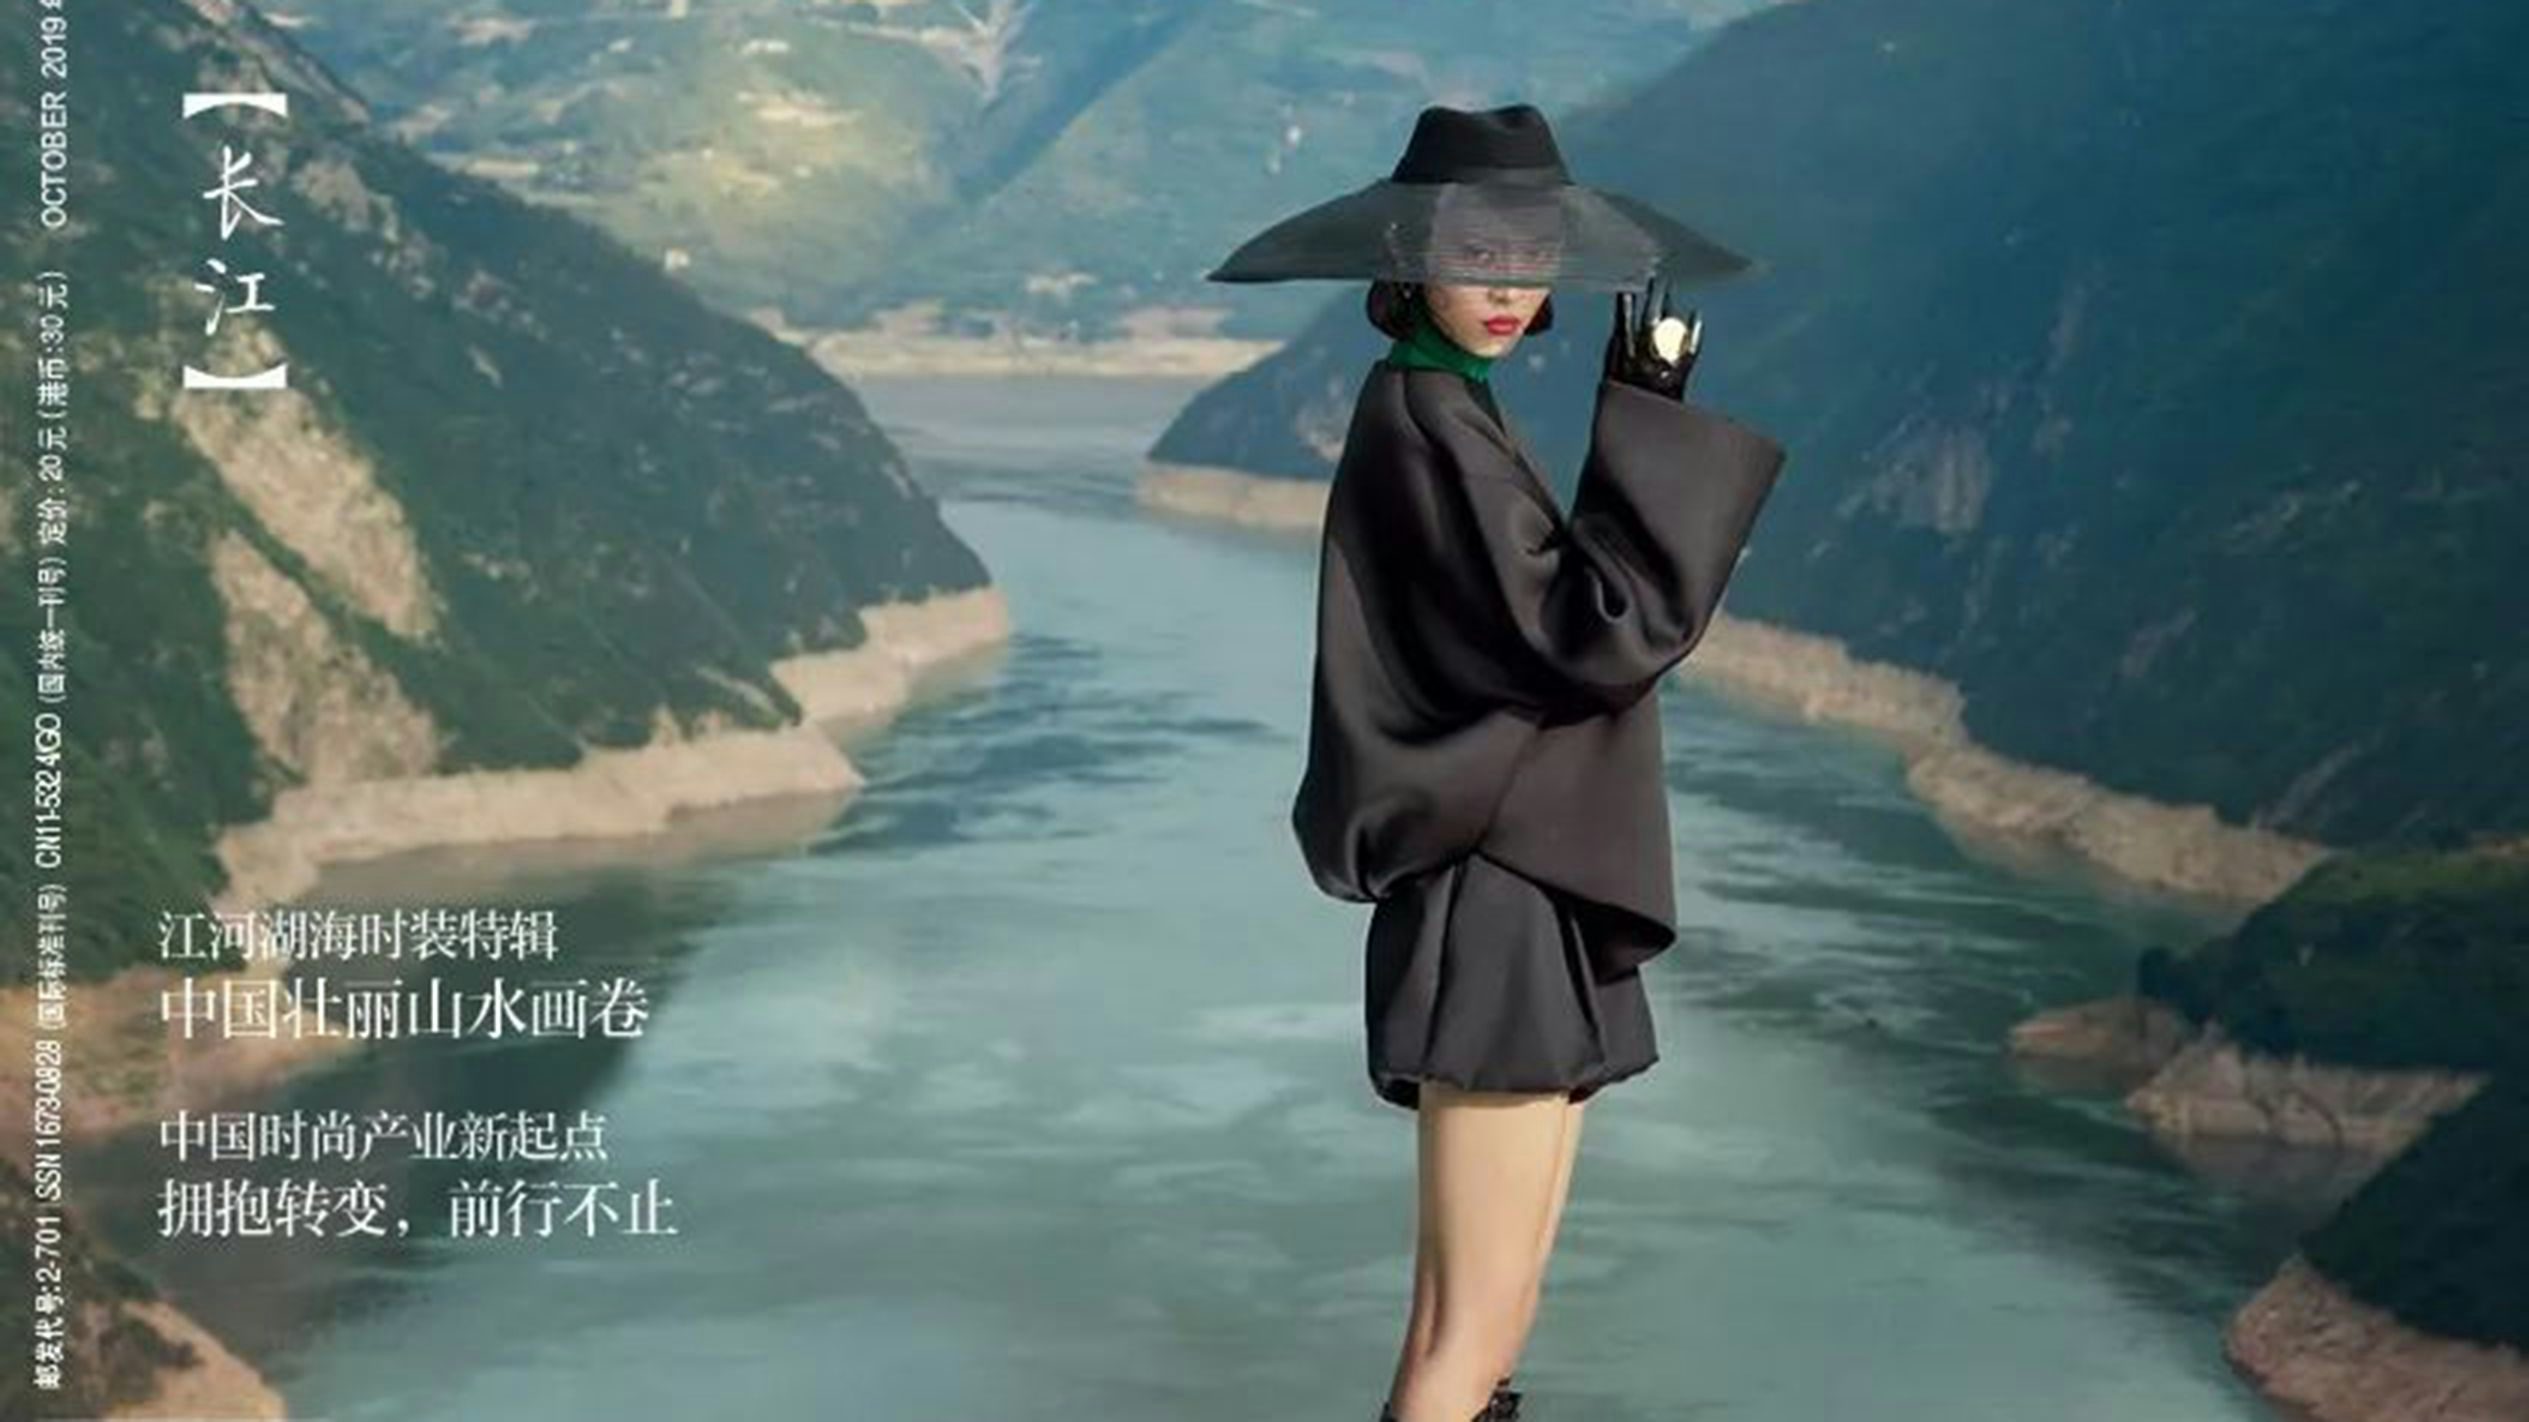 How A Brand Can Build A Cliche-Proof Chinese Style